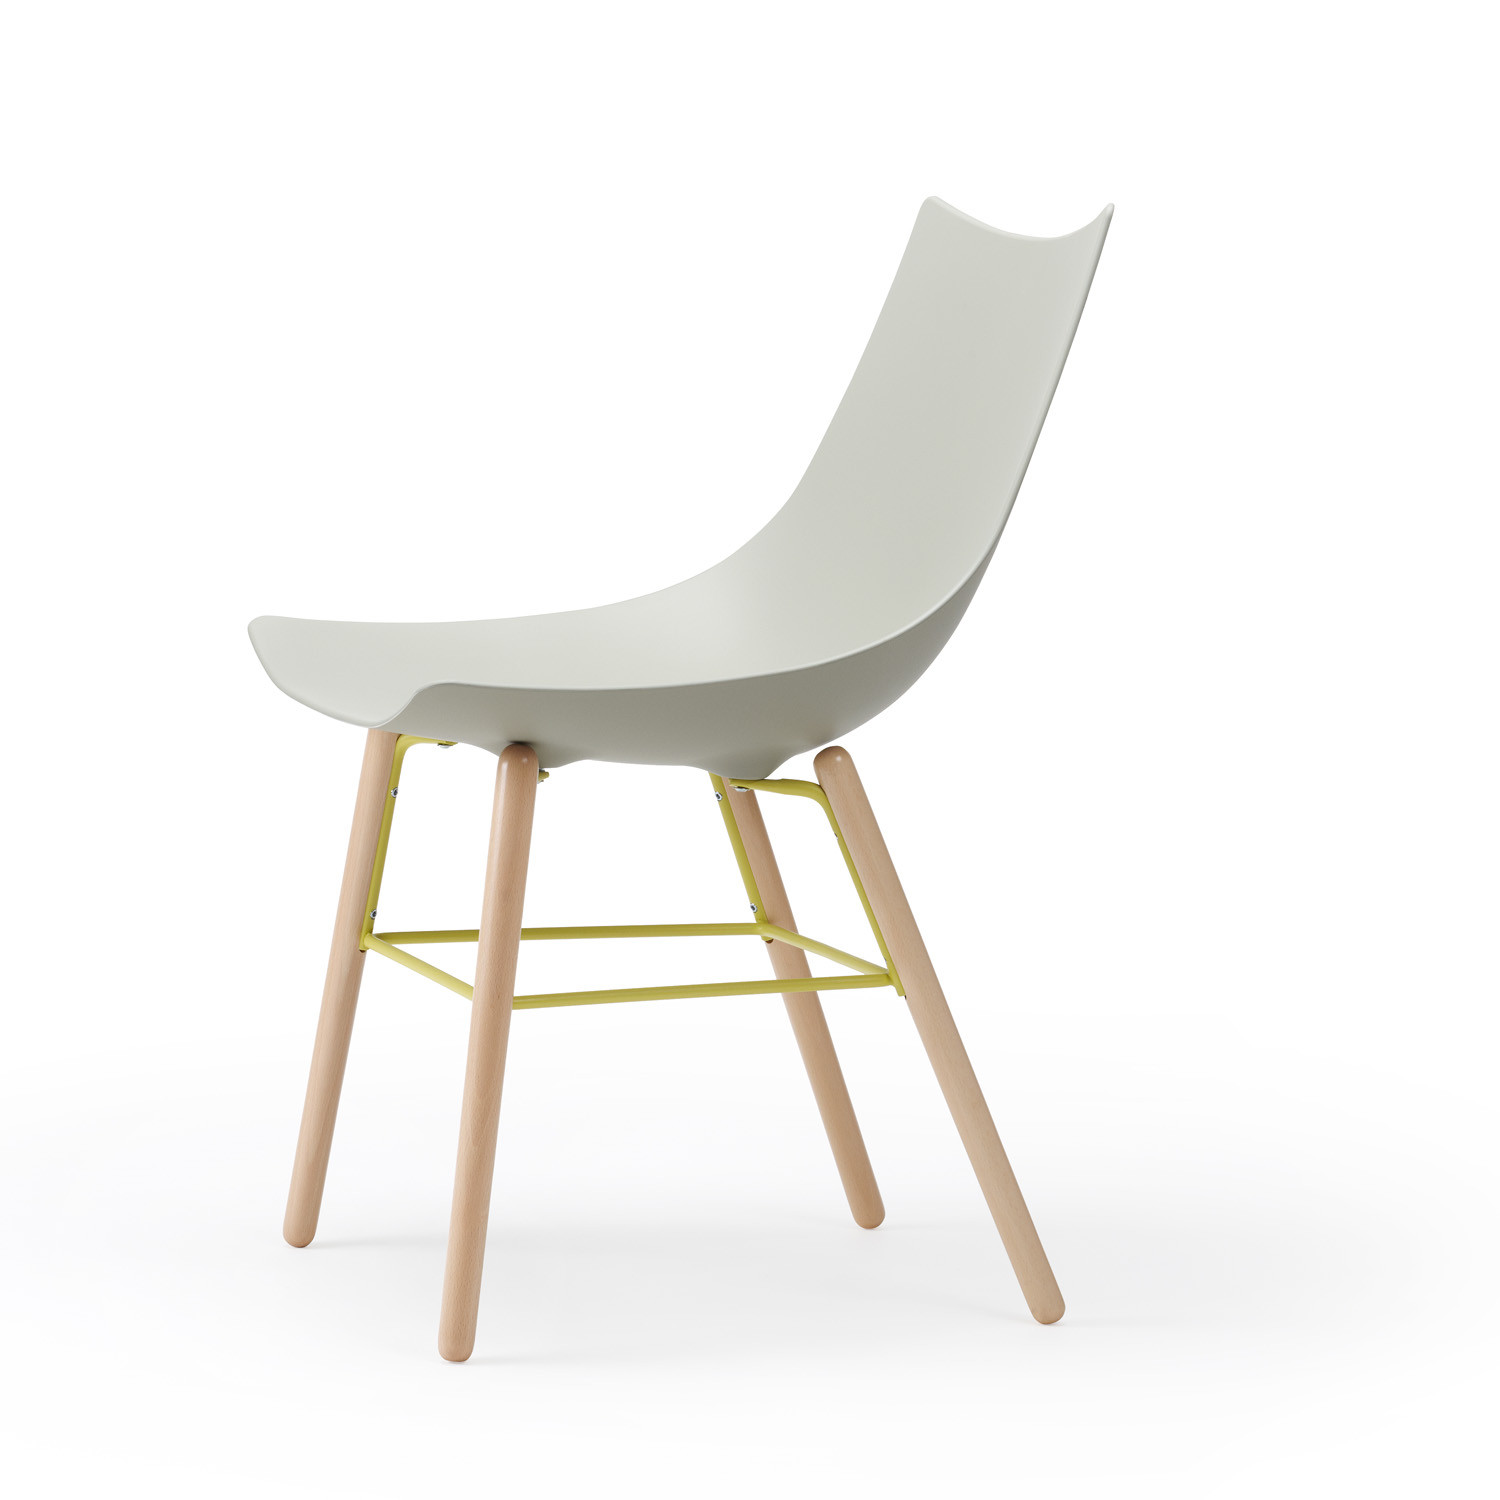 Luc Wood Chair from Apres